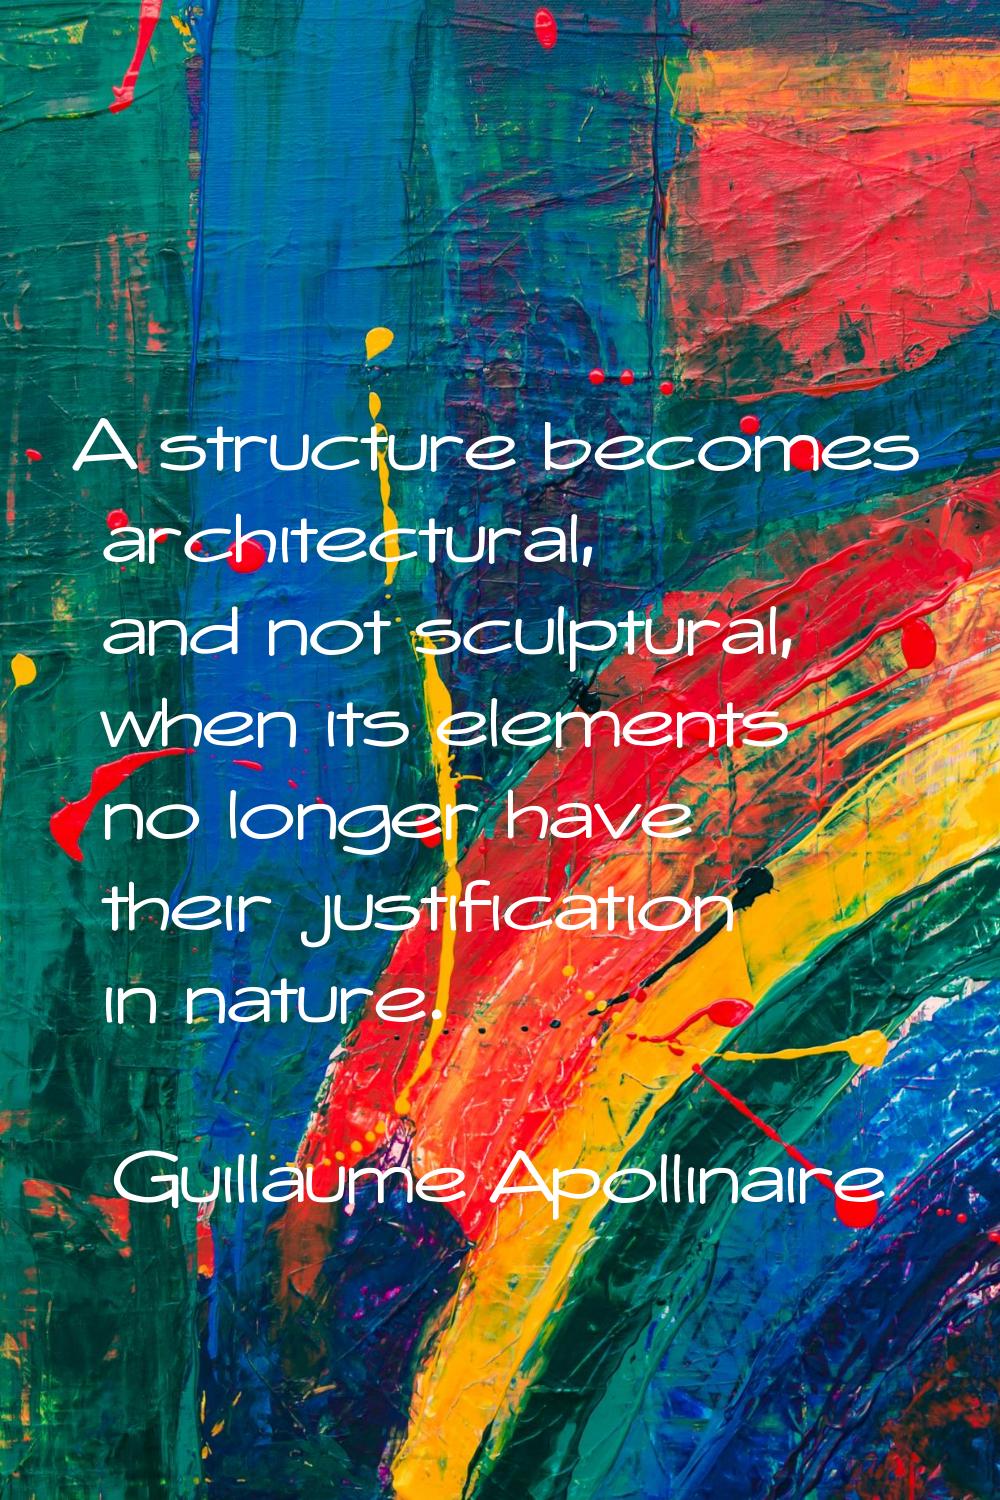 A structure becomes architectural, and not sculptural, when its elements no longer have their justi